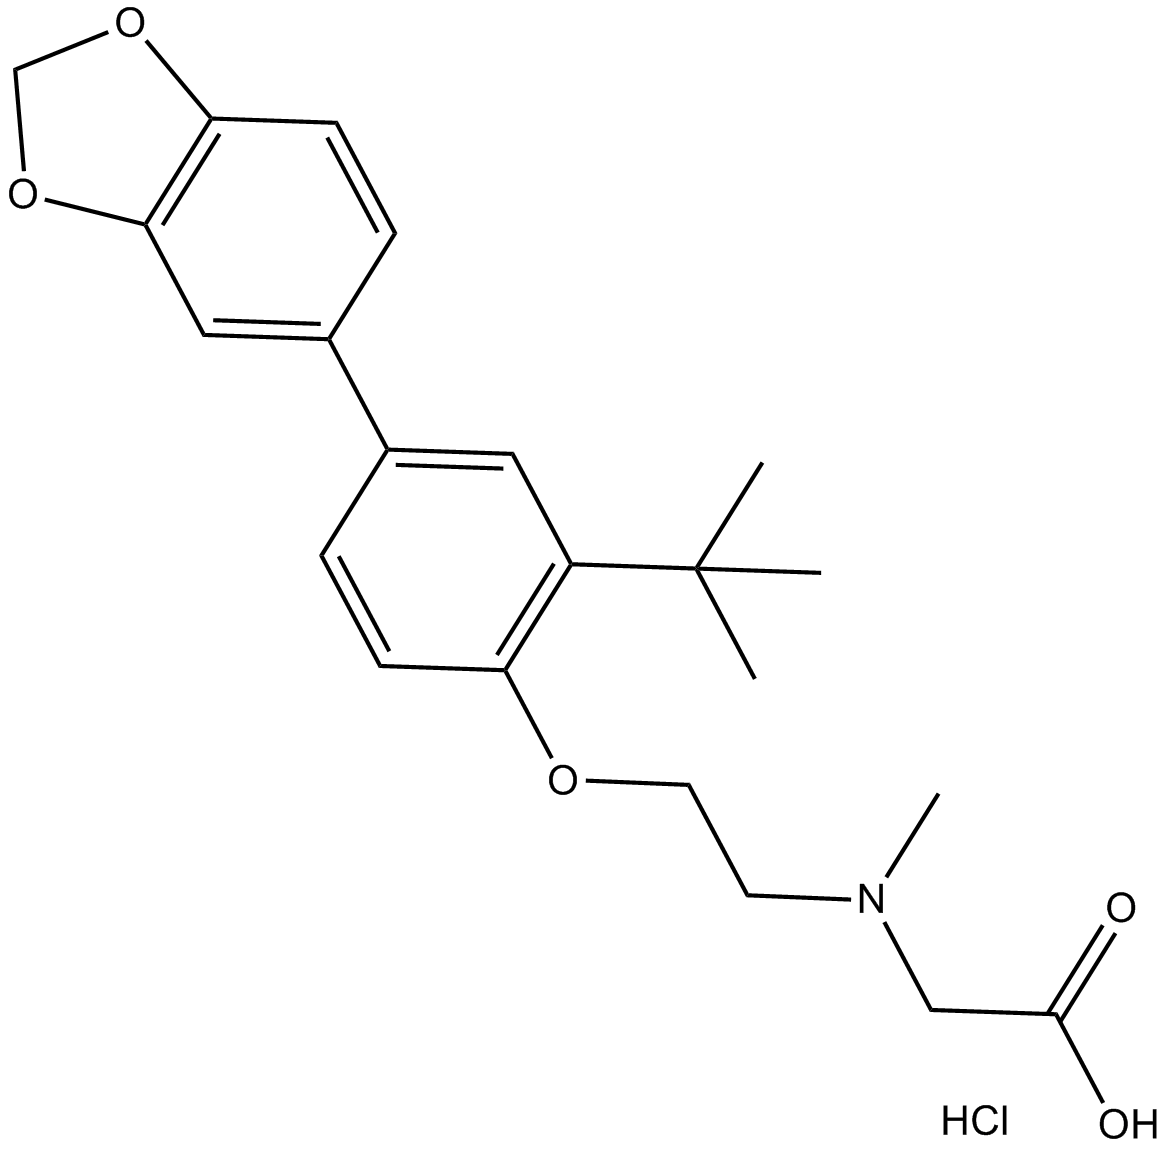 LY 2365109 hydrochloride  Chemical Structure